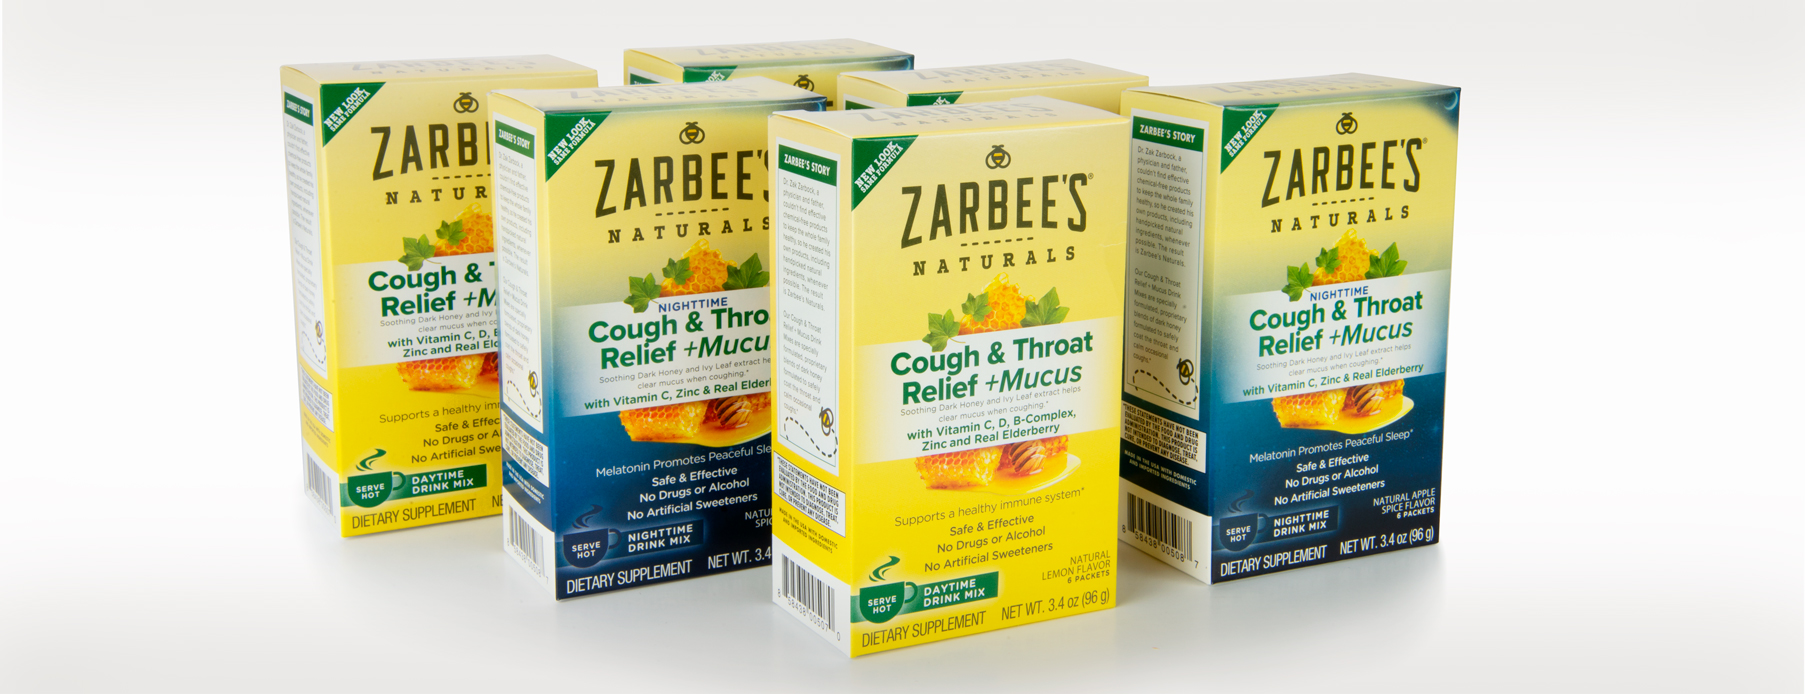 Zarbees_Cough_Throat_Relief_Slider2Img6